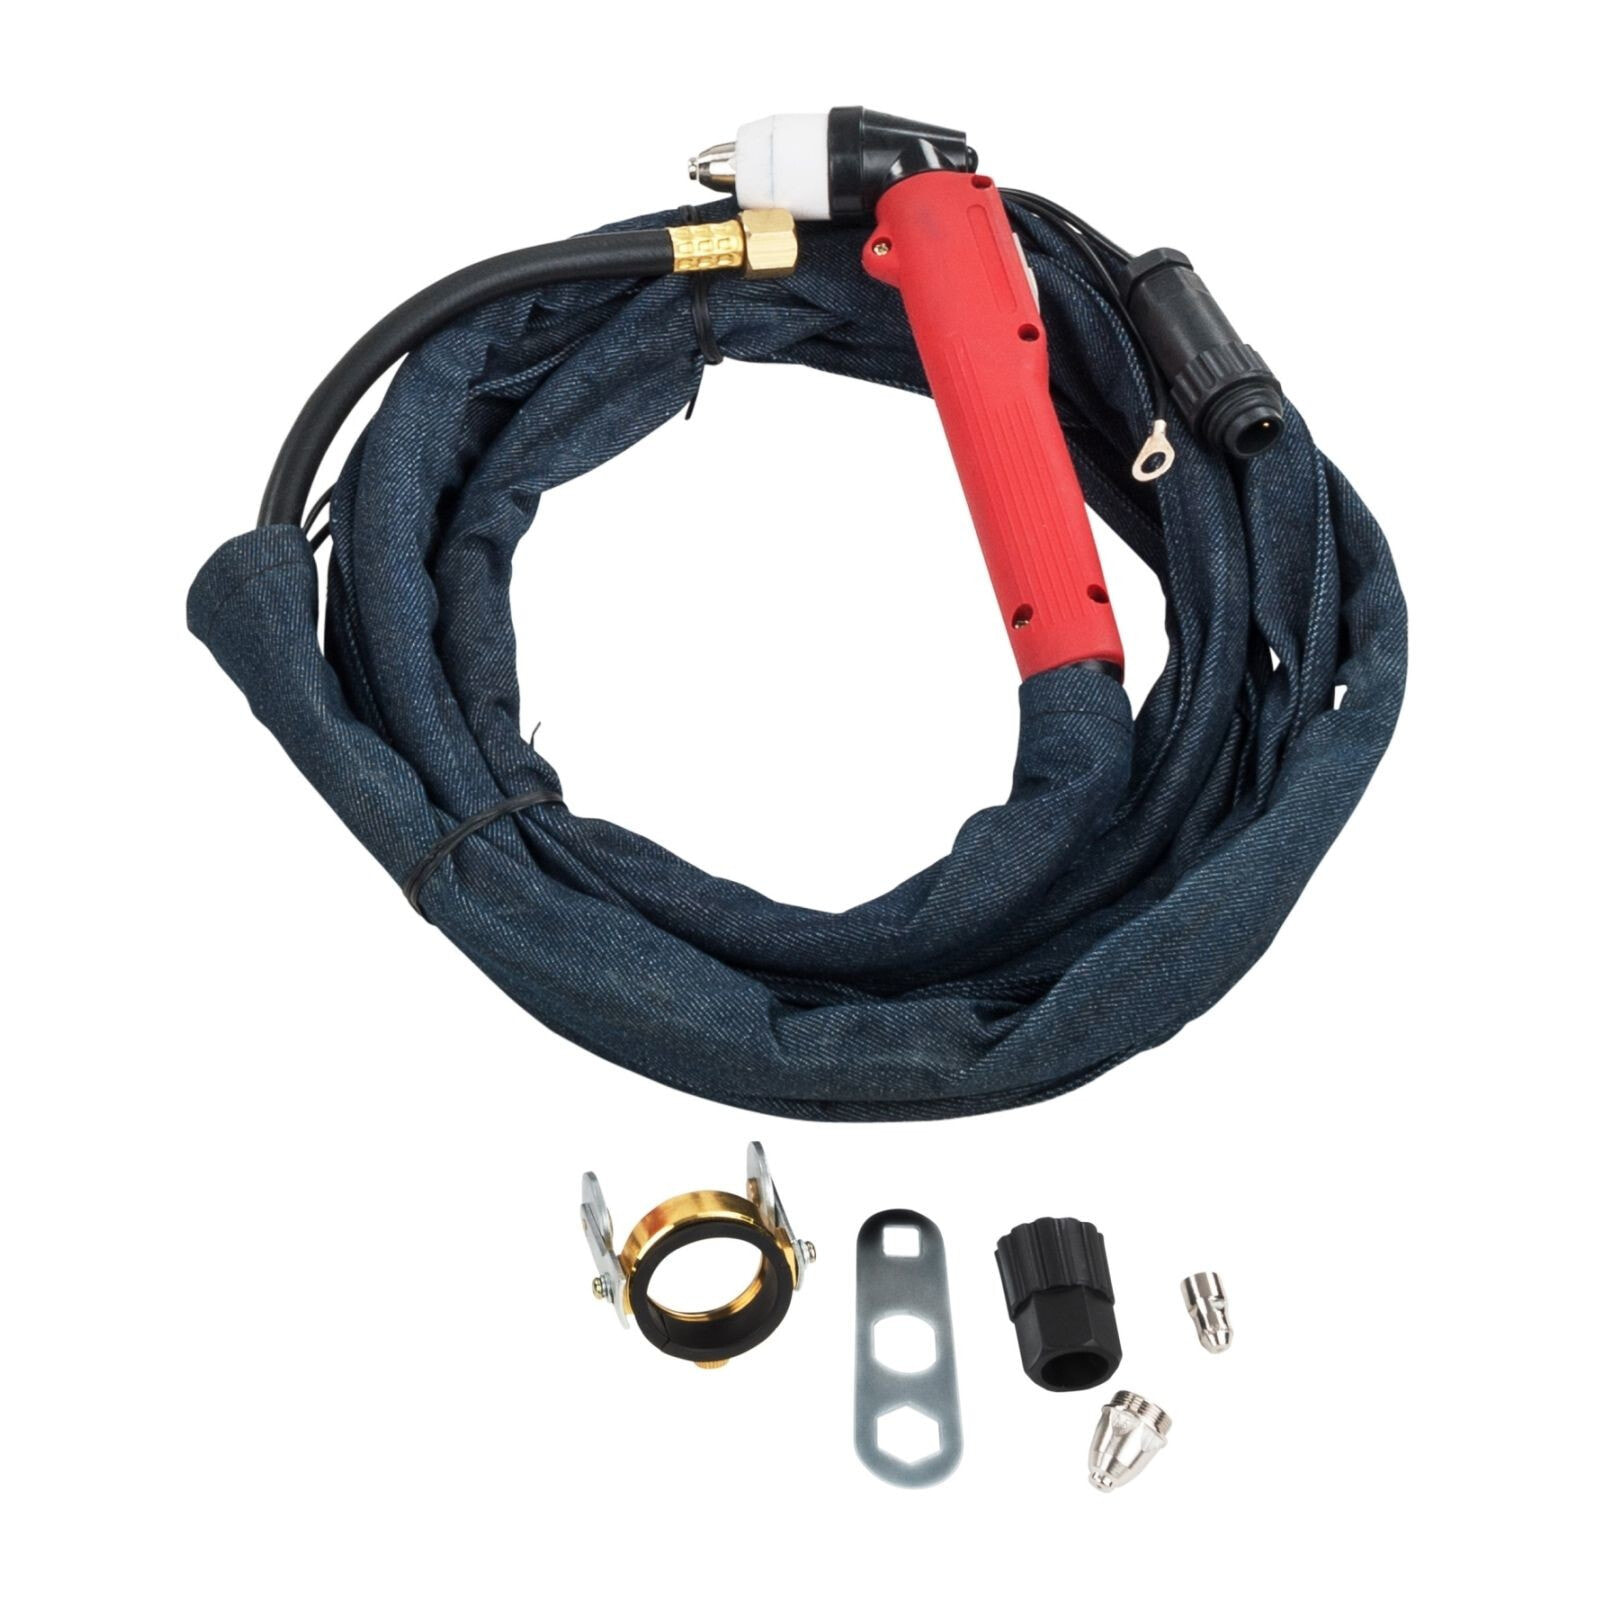 Hand torch for cutters CUT 80-125 with 4 m cables and accessories